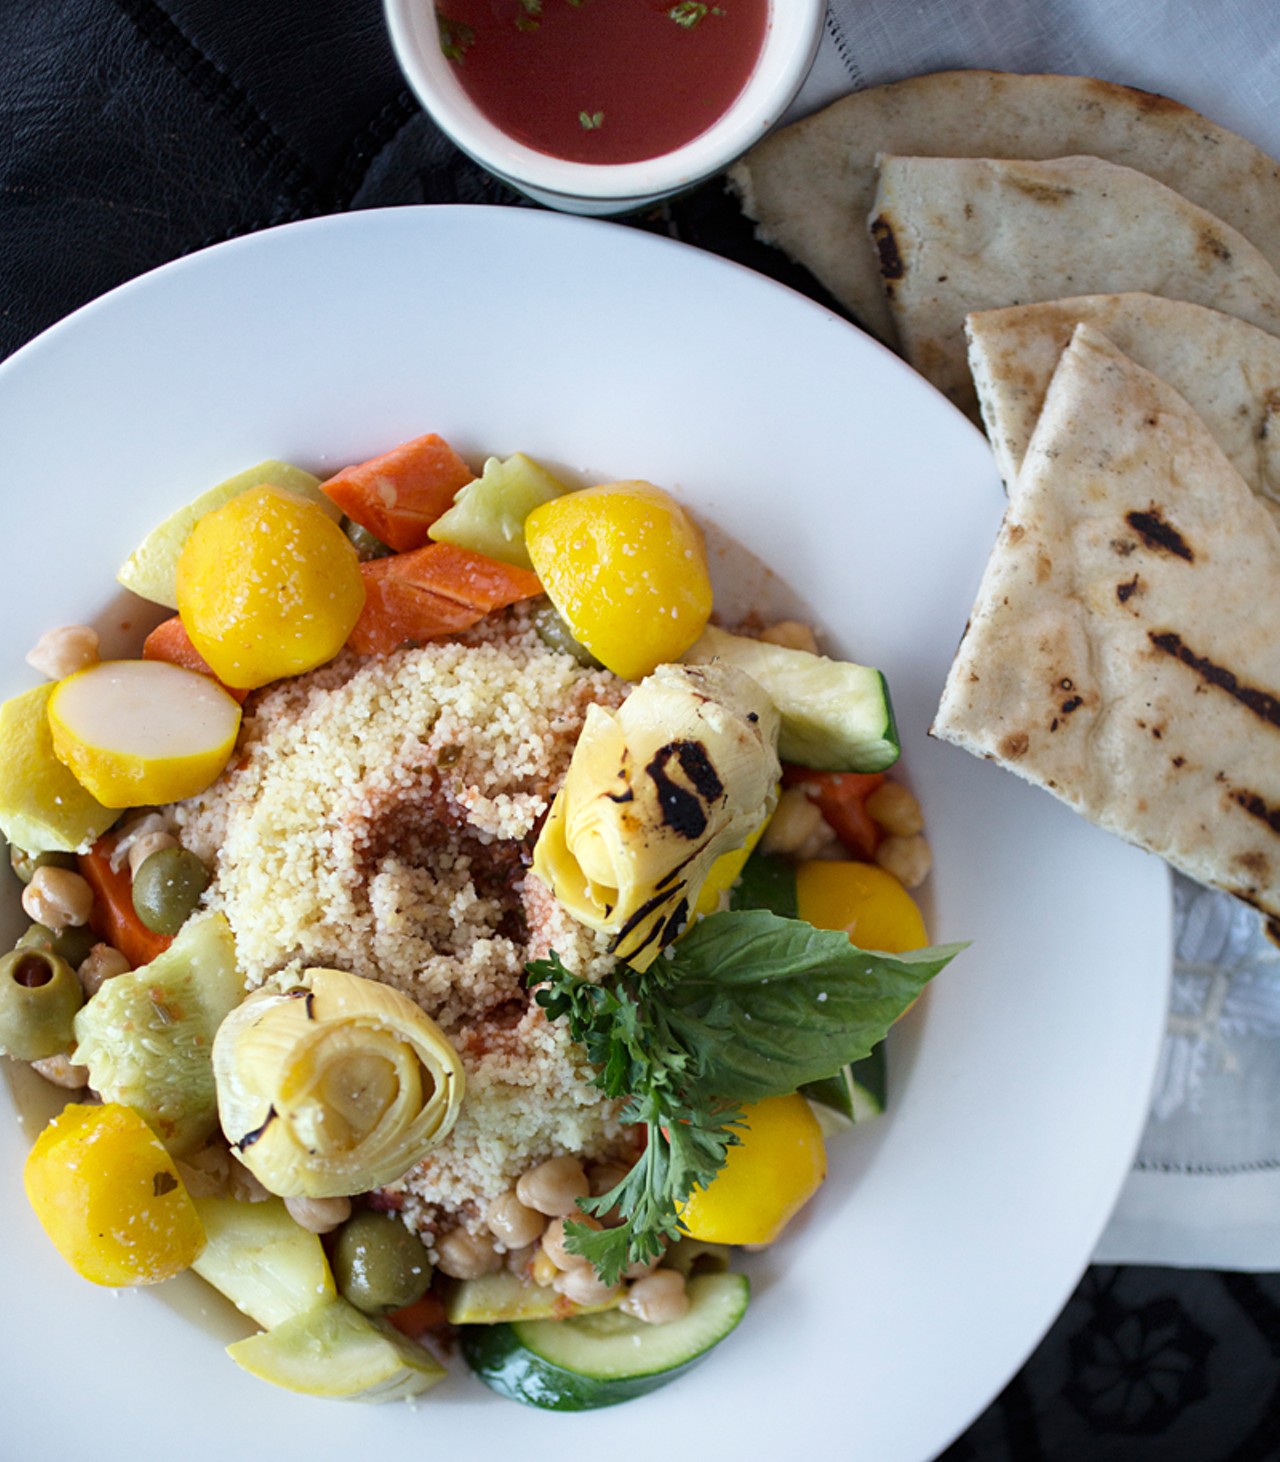 The vegetarian couscous is prepared with large cuts of seven vegetables and garbanzo beans atop a bed of couscous. A warm seasoned broth is served on the side.